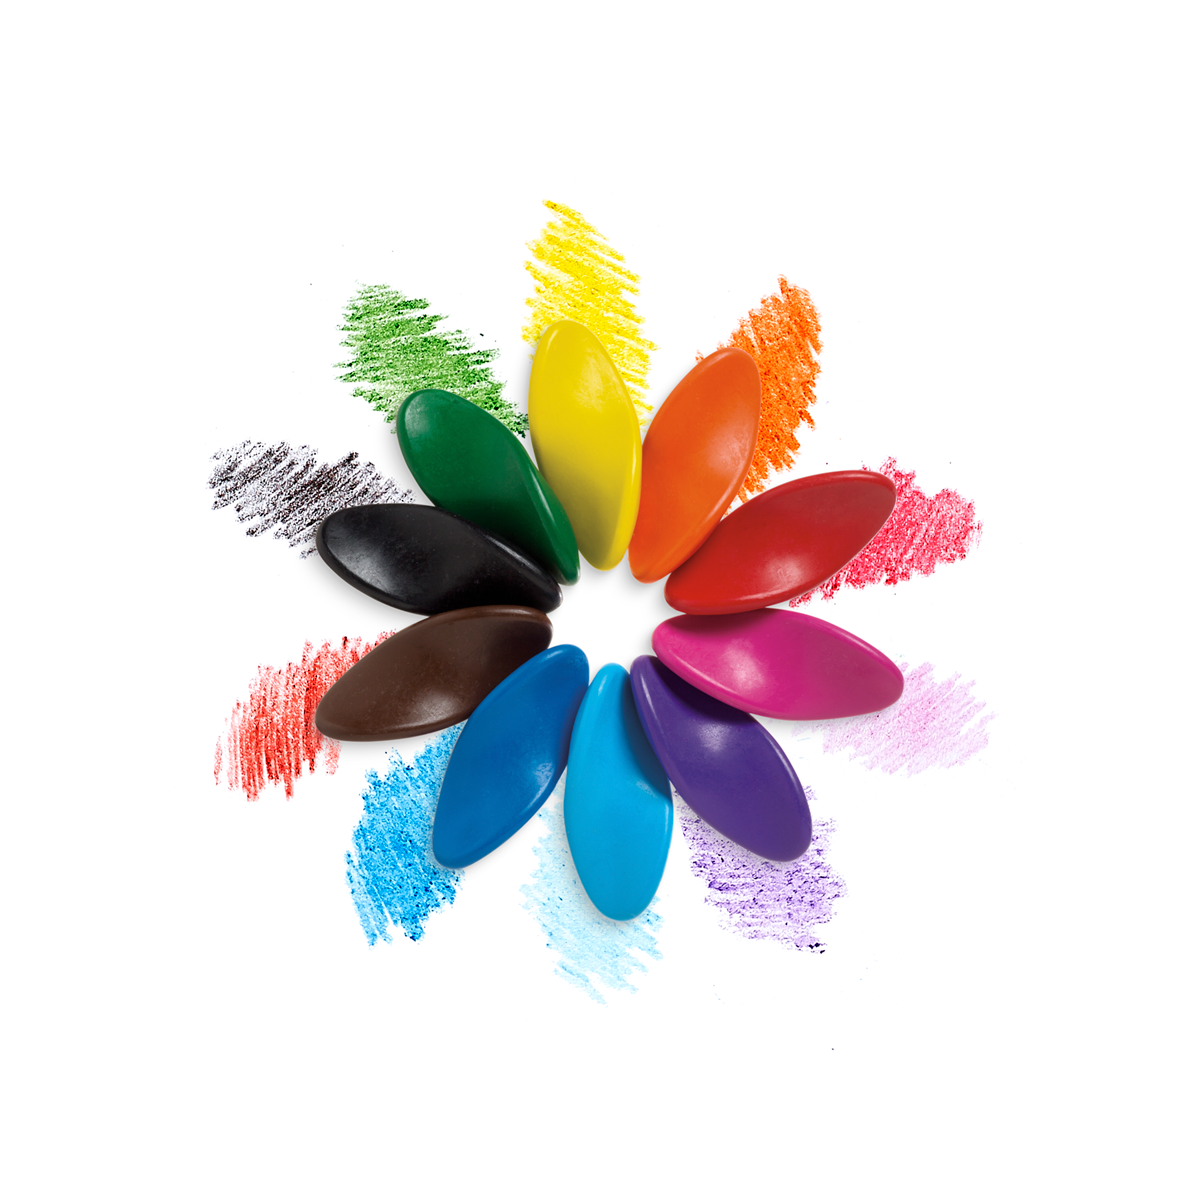 Left Right Crayons arranged in a flower formation next to color swatches